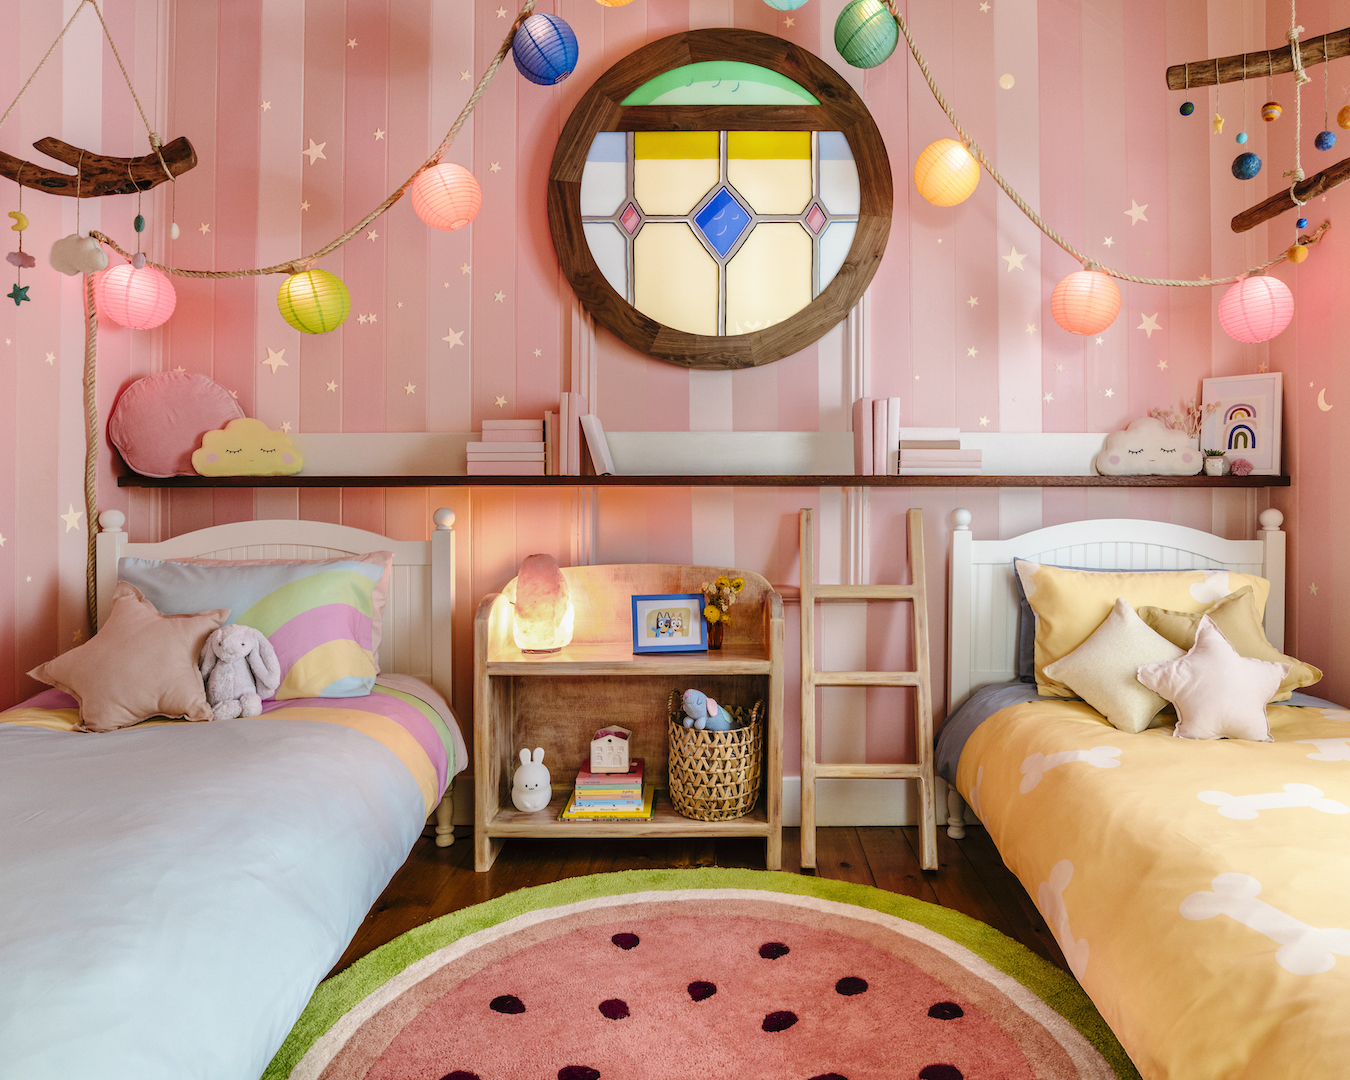 A pastel bedroom with two small beds and colourful lanterns.